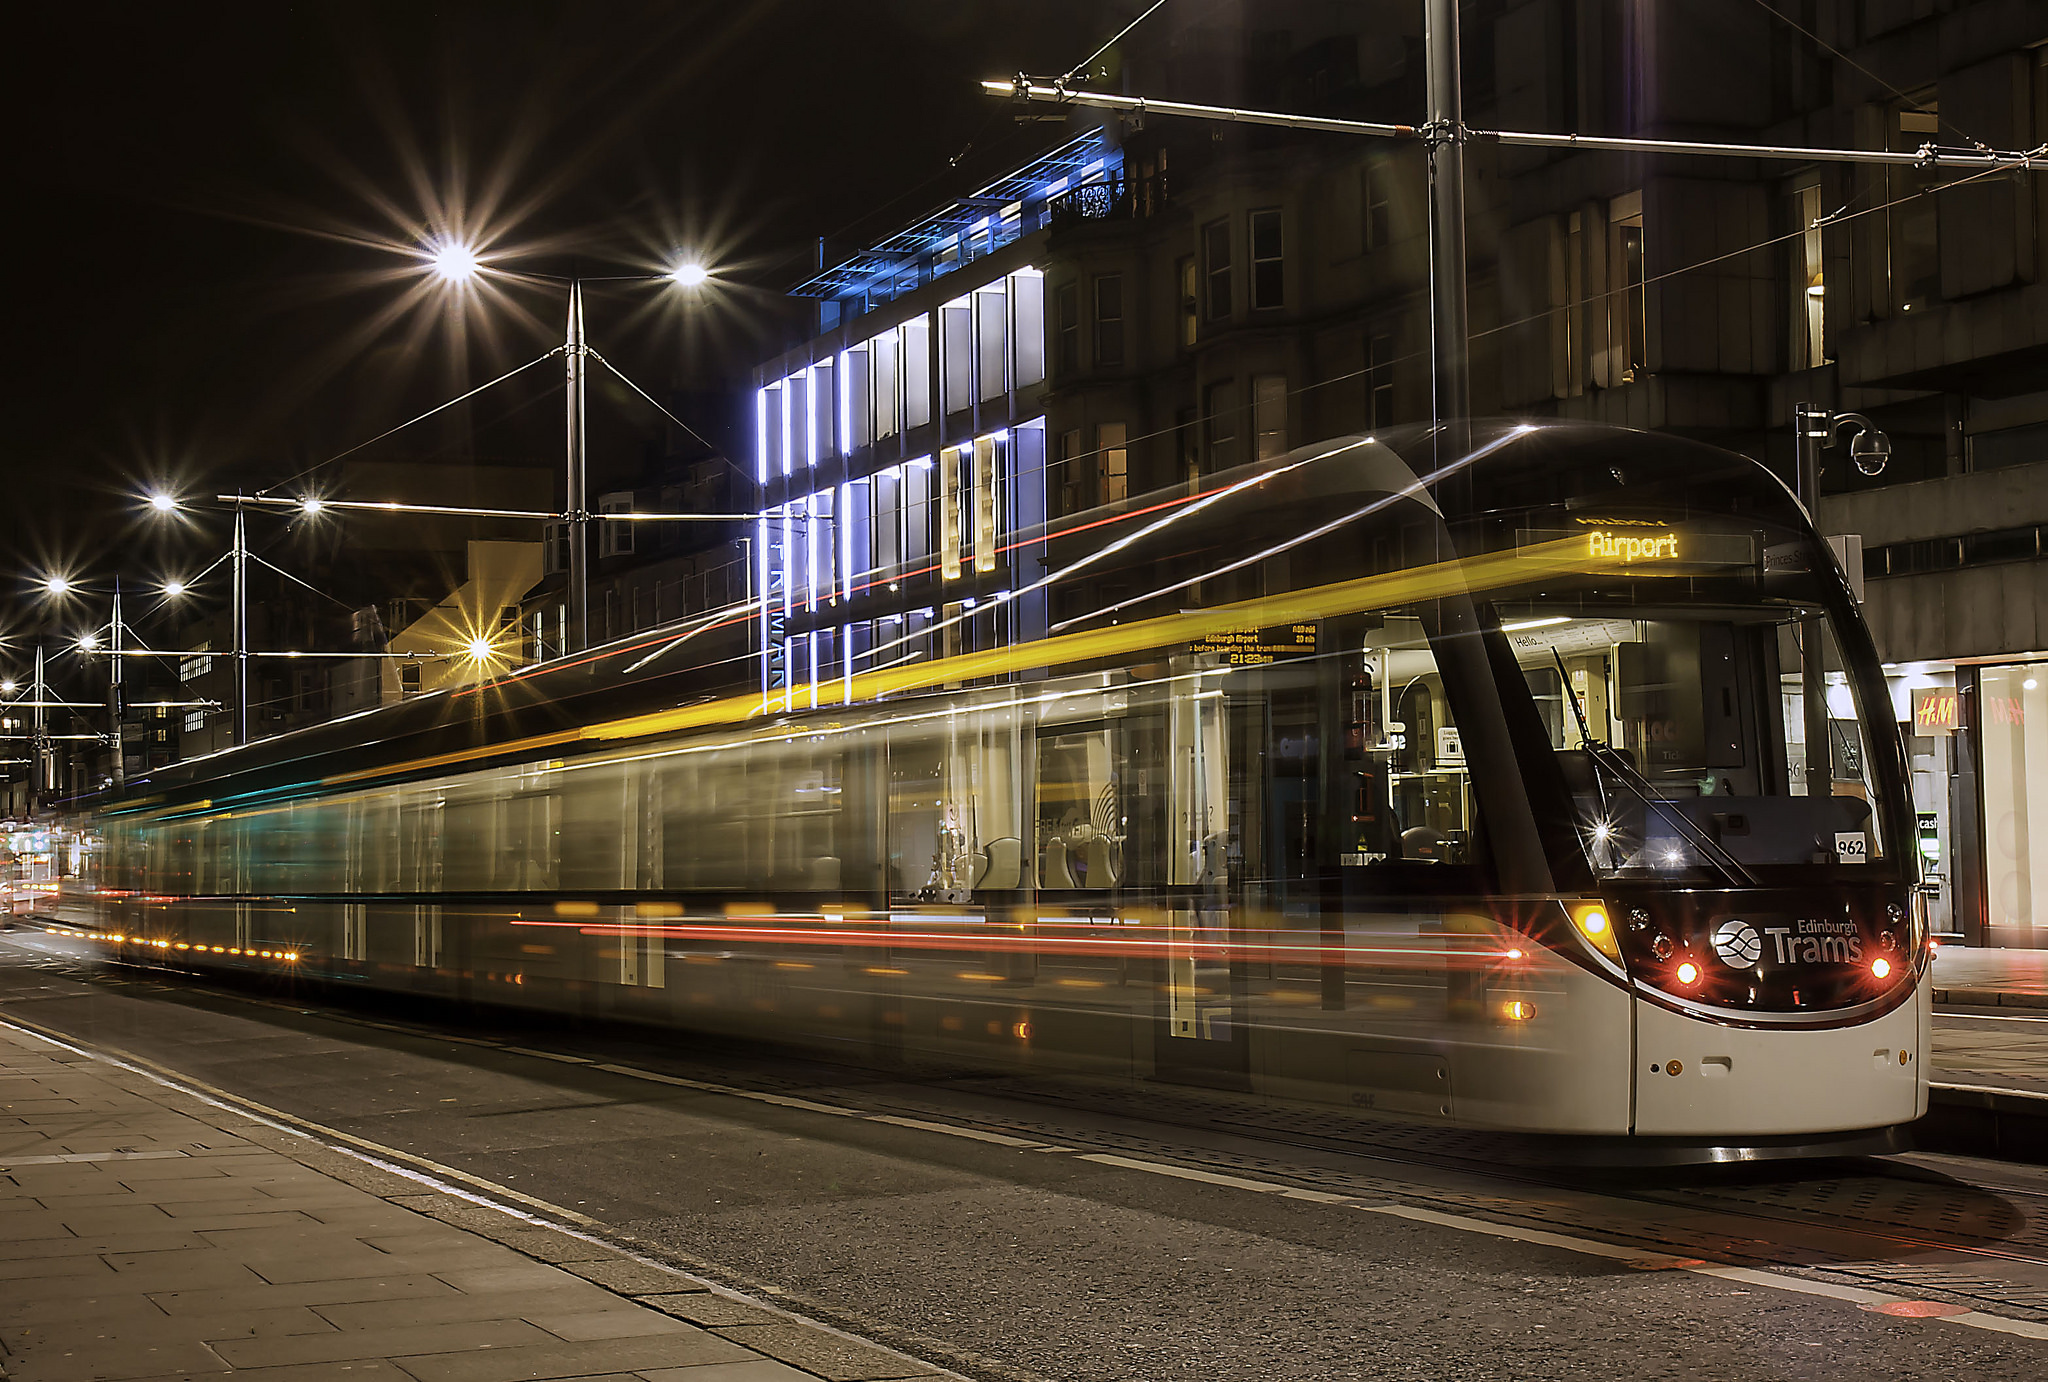 Tram by Kirsty McWirther